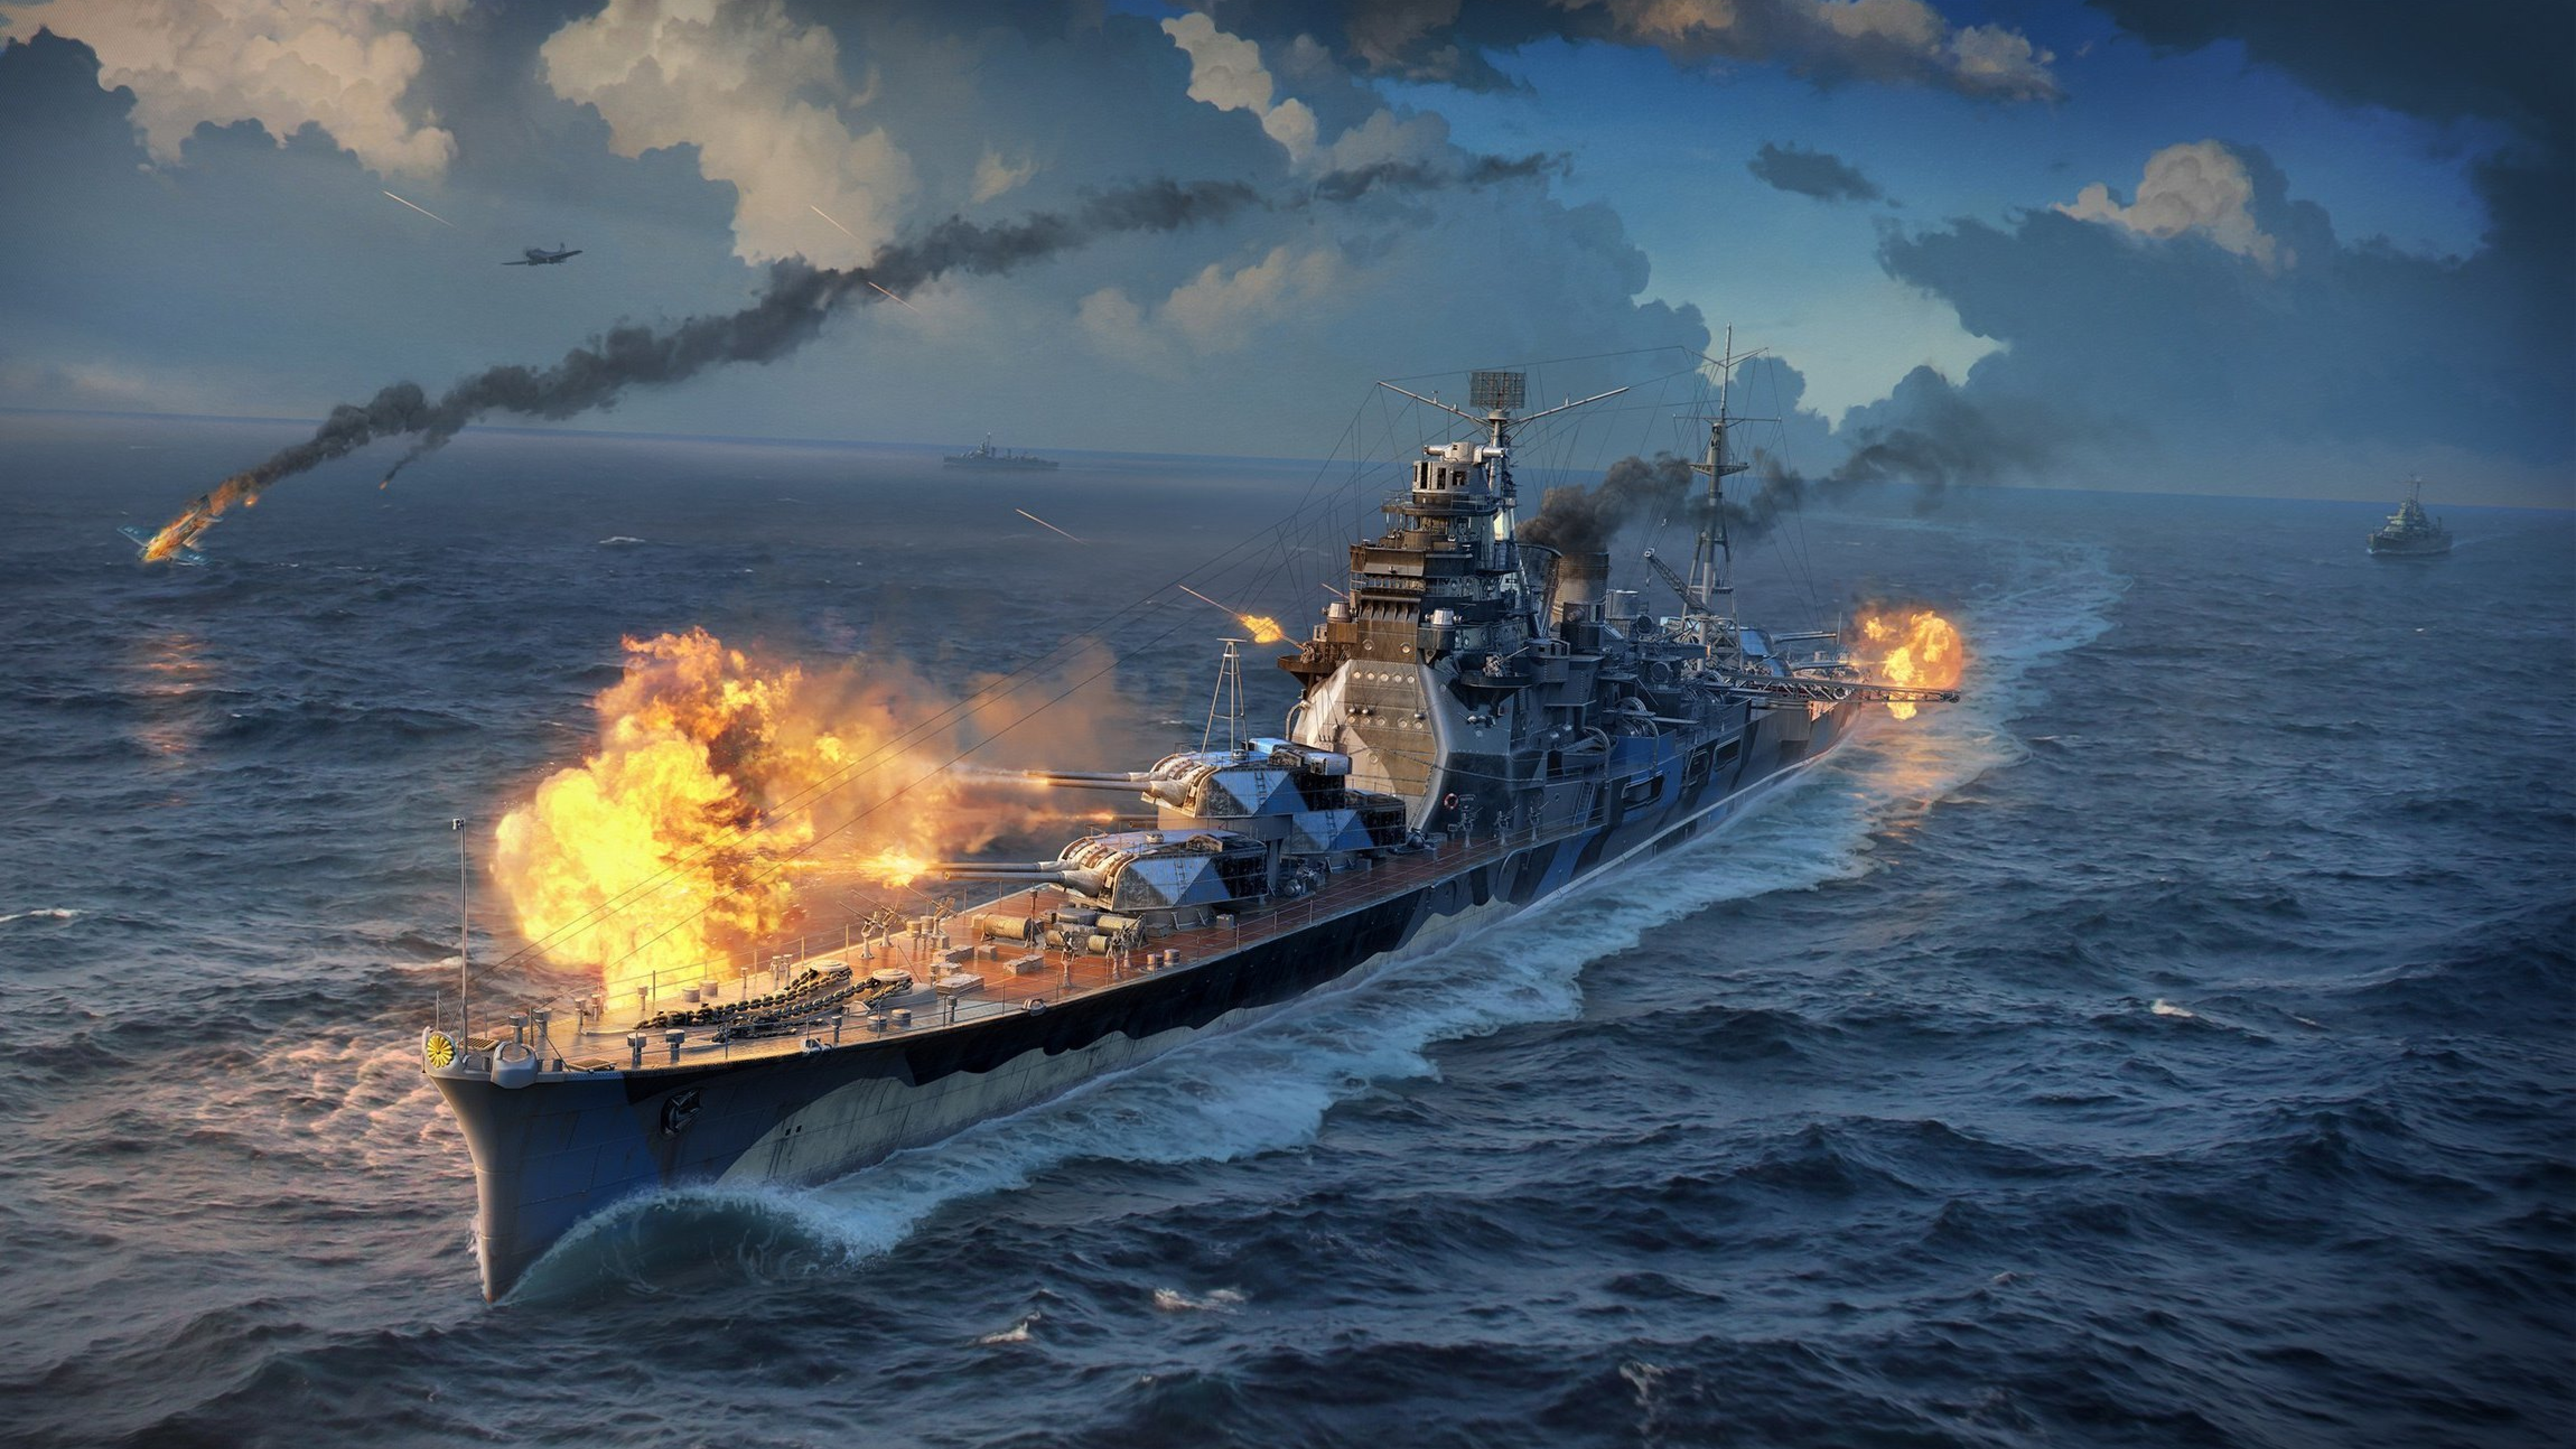 7680x43 World Of Warships Wows 8k Wallpaper Hd Games 4k Wallpapers Images Photos And Background Wallpapers Den